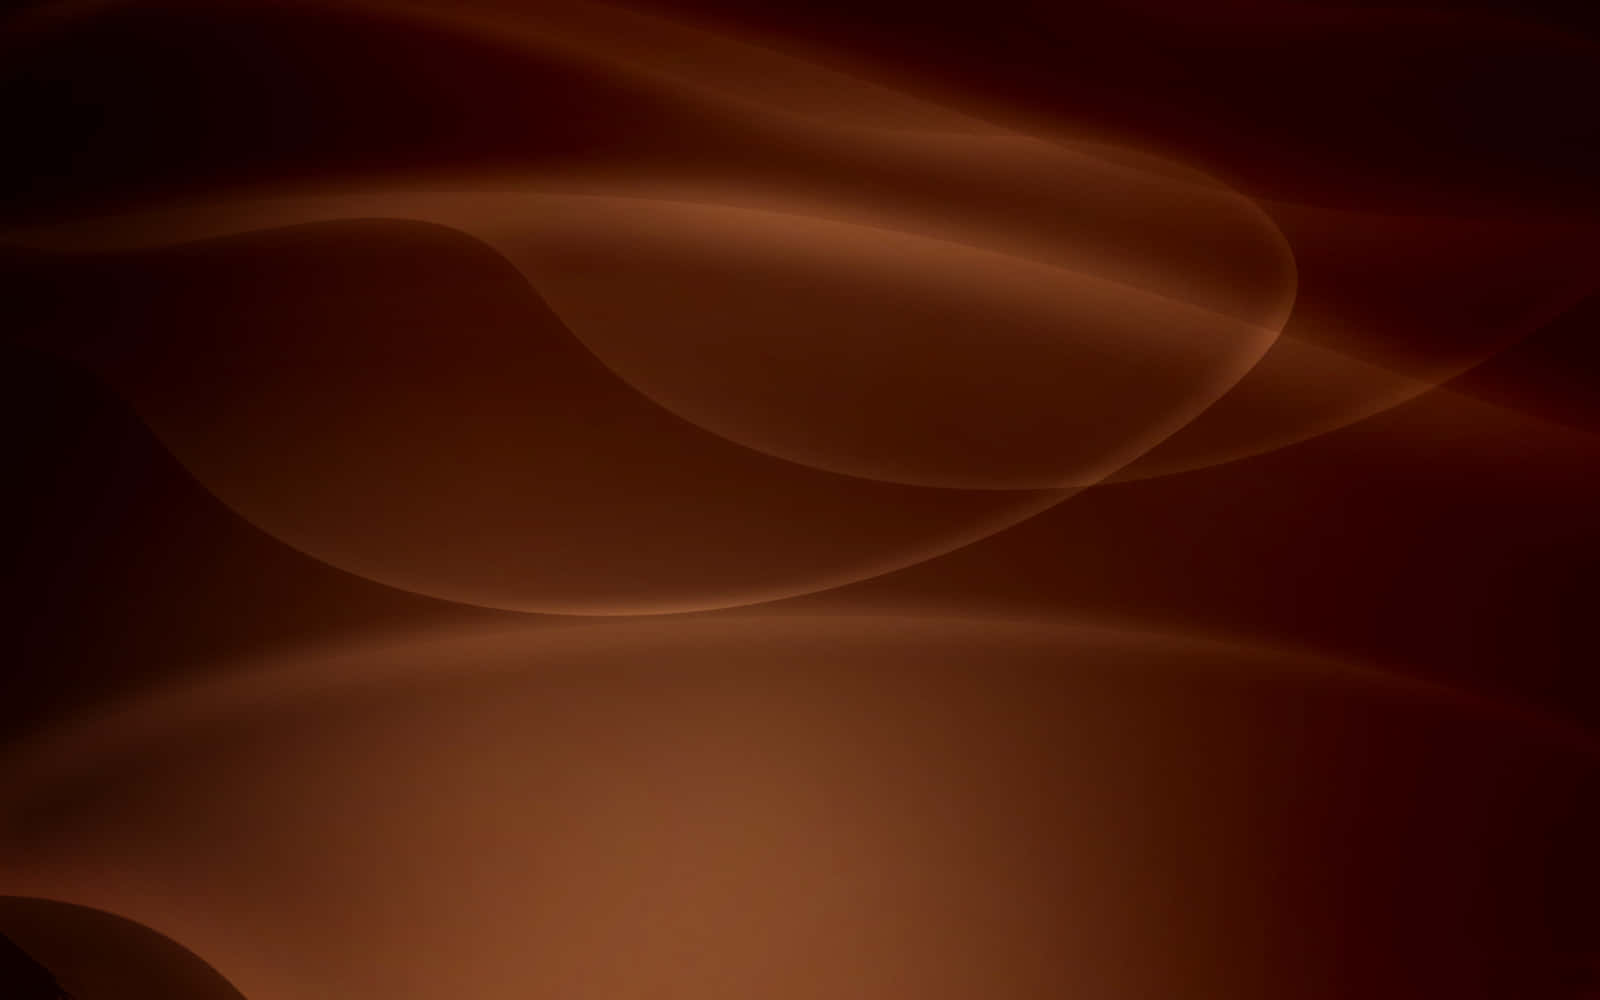 A dark brown background with hints of subtle detail